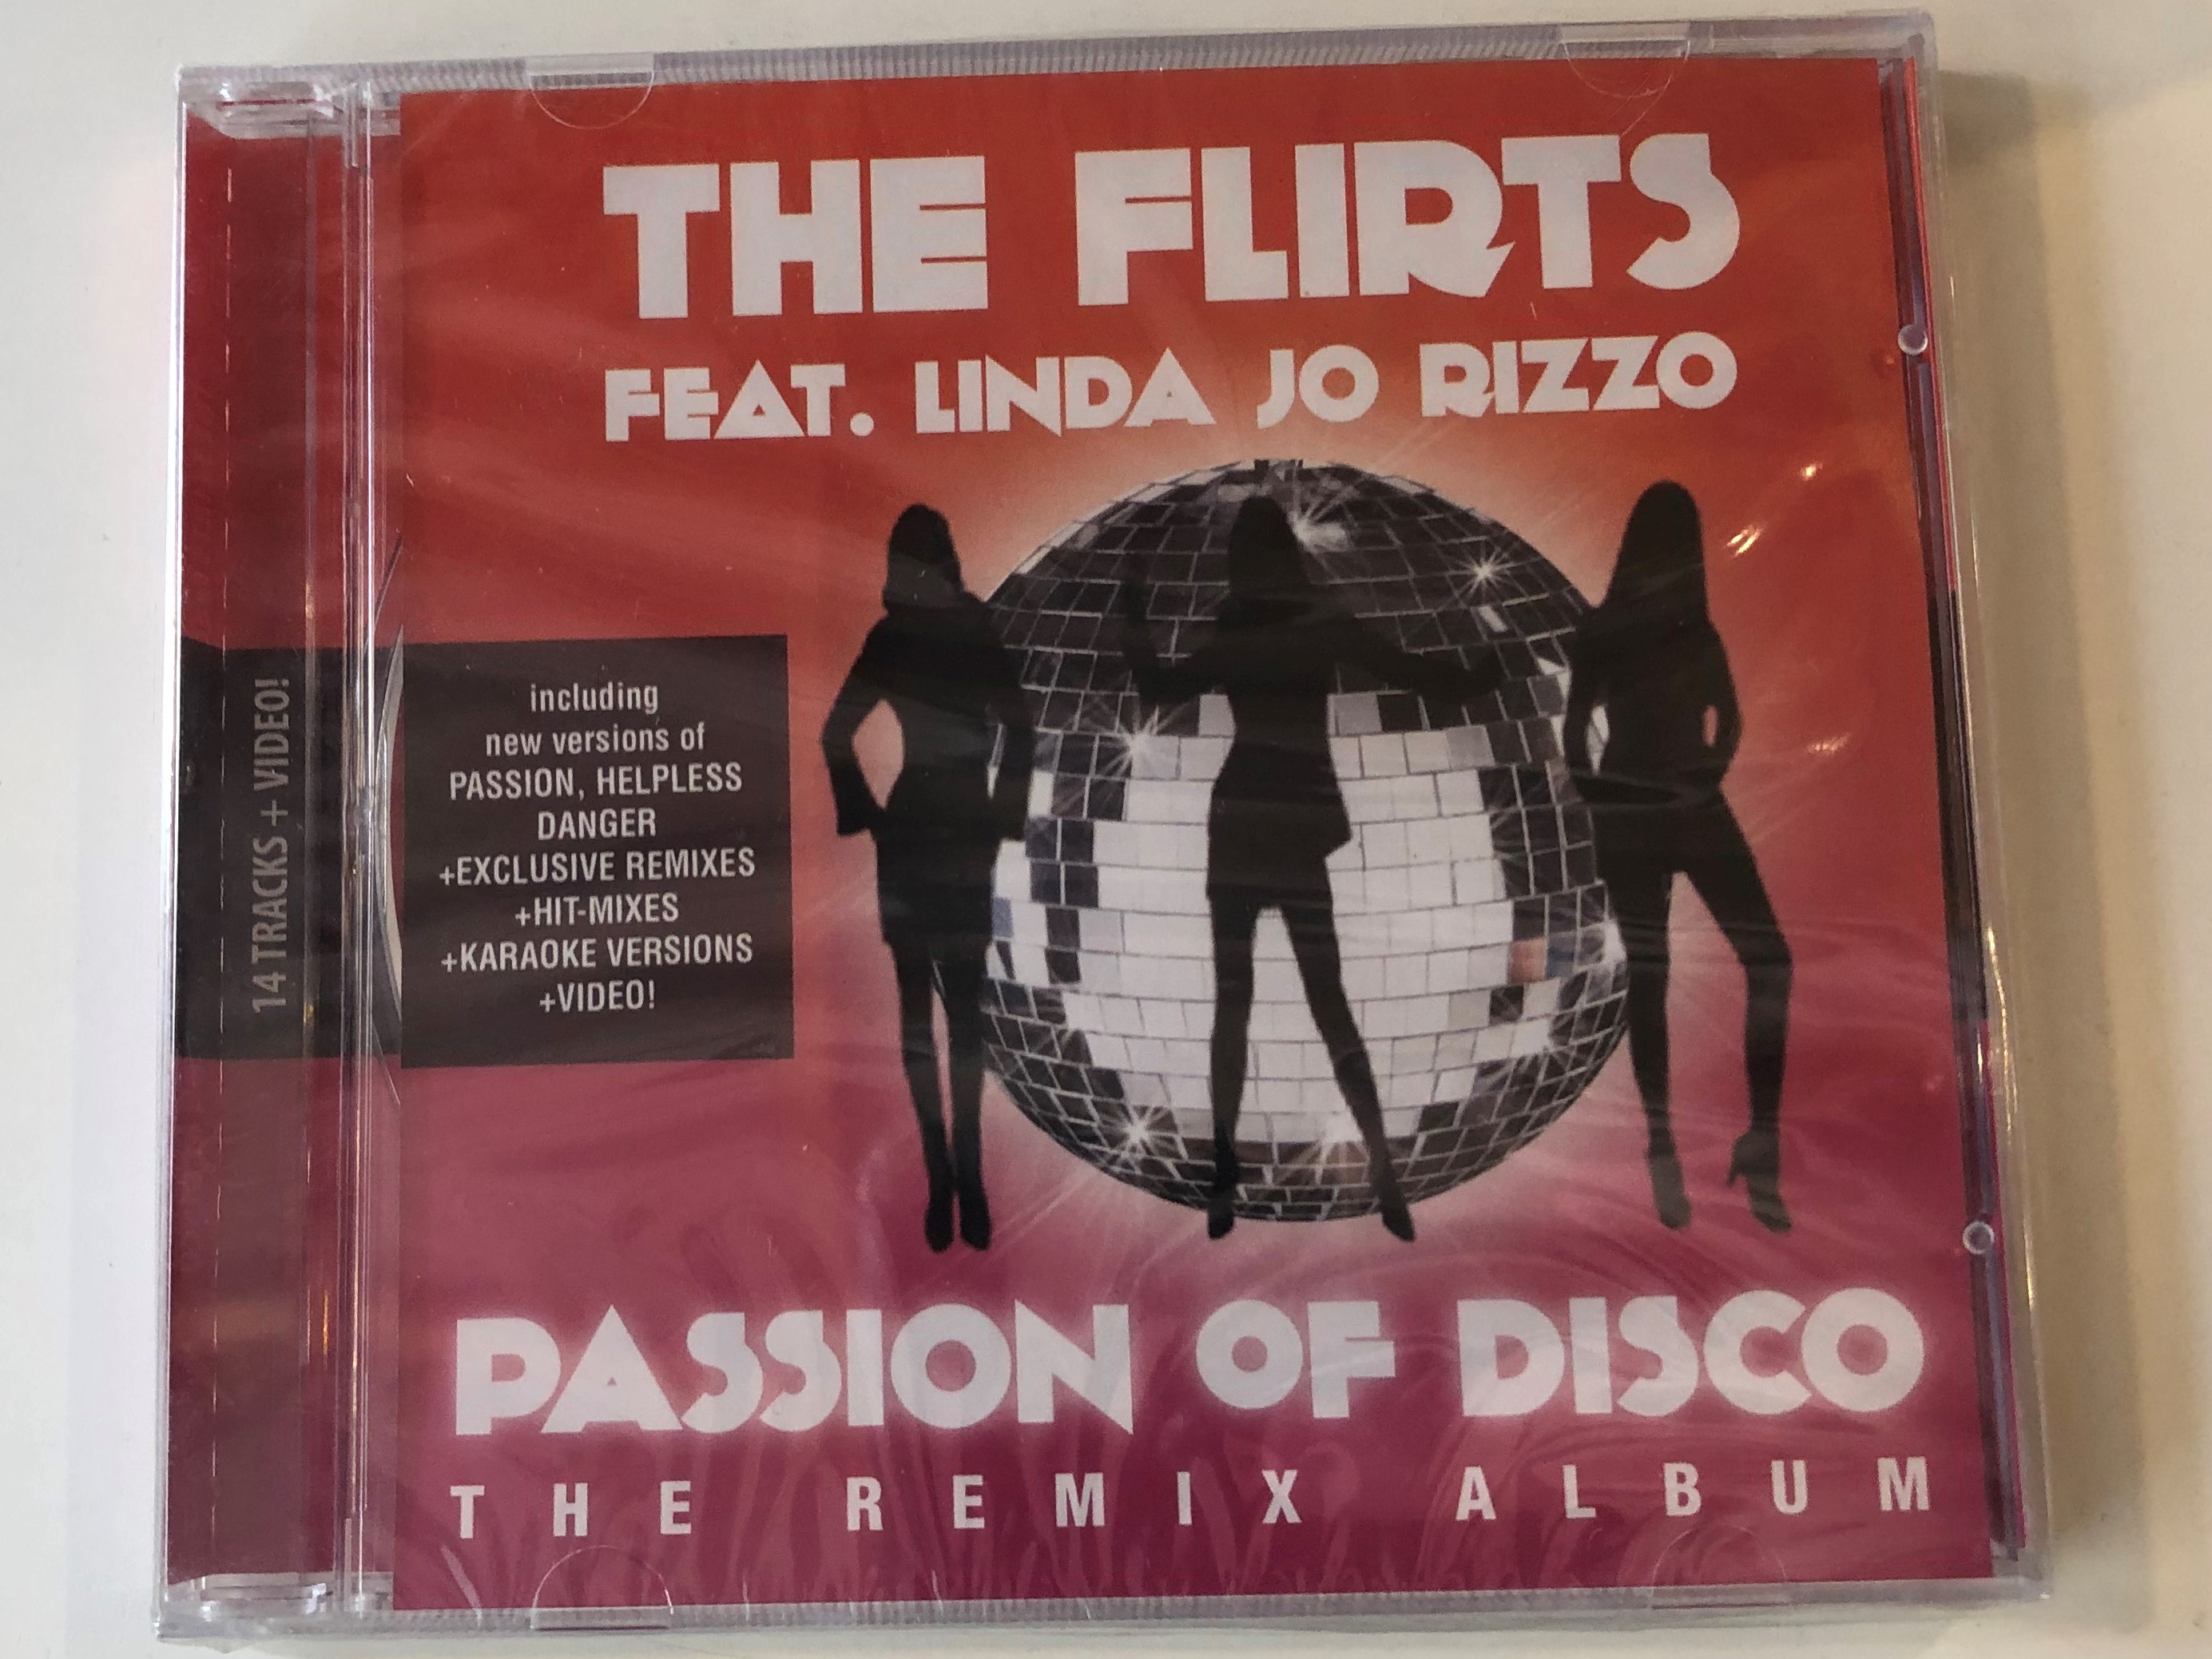 the-flirts-feat.-linda-jo-rizzo-passion-of-disco-the-remix-album-14-tracks-video-including-new-versions-of-passion-helpless-danger-exclusive-remixes-hit-mixes-karaoke-versions-1-.jpg